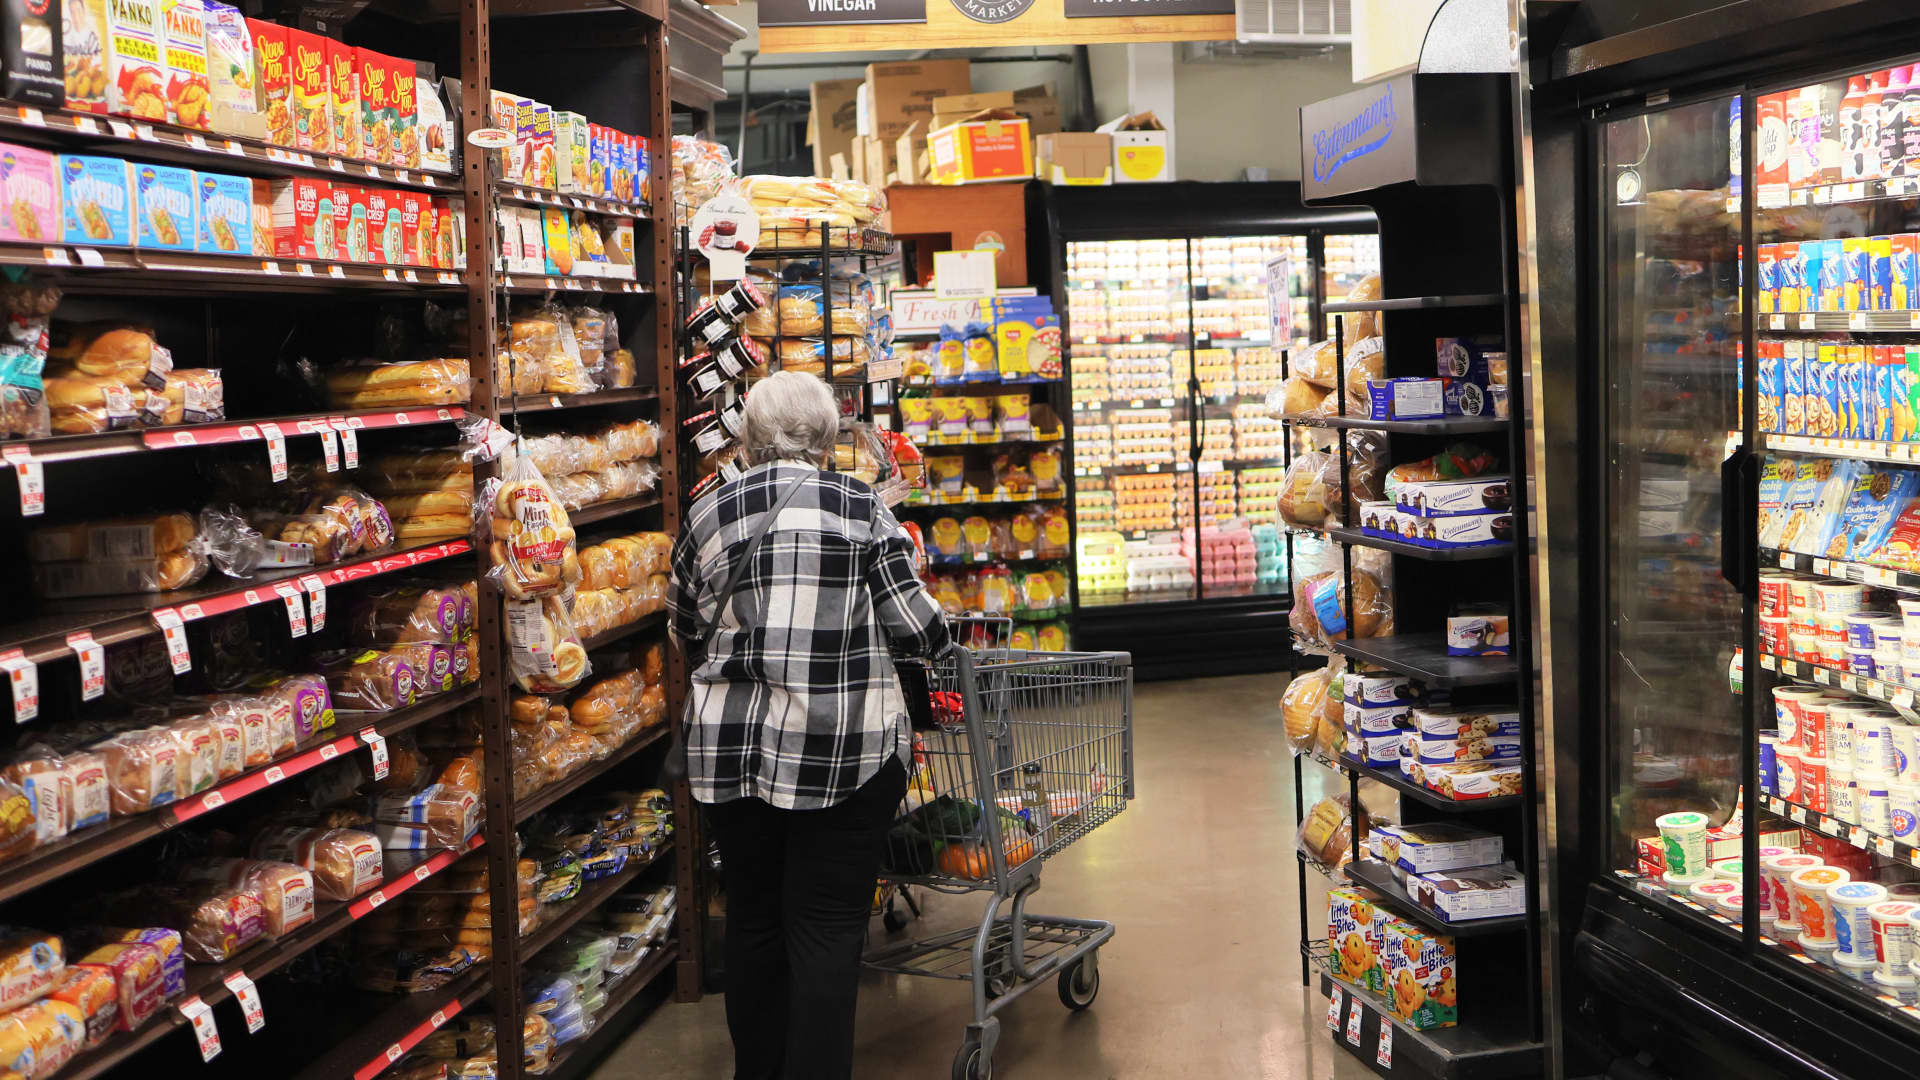 Inflation rose more than expected in January as stubbornly high shelter prices weighed on consumers, the Labor Department reported Tuesday. The consum